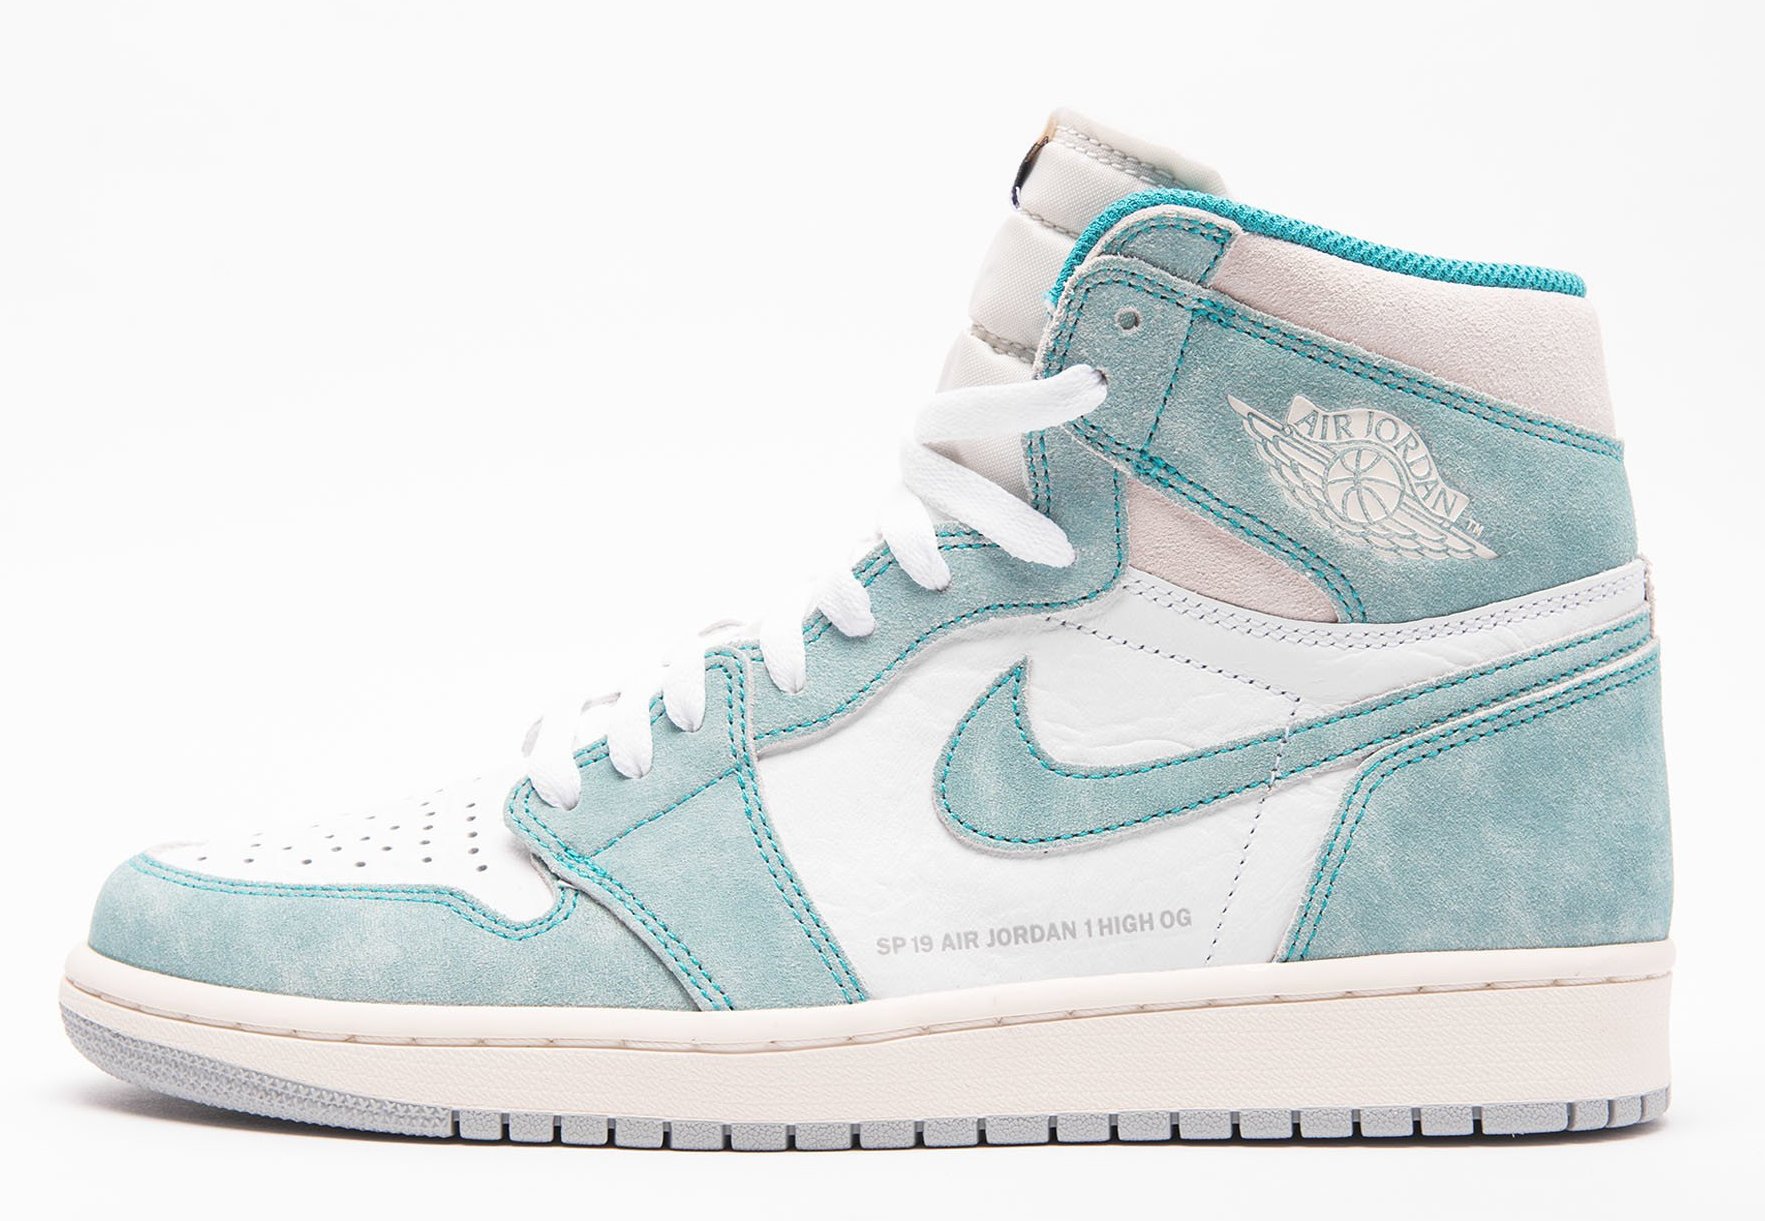 These Vintage-Inspired Air Jordan 1s Drop Next Month | Complex